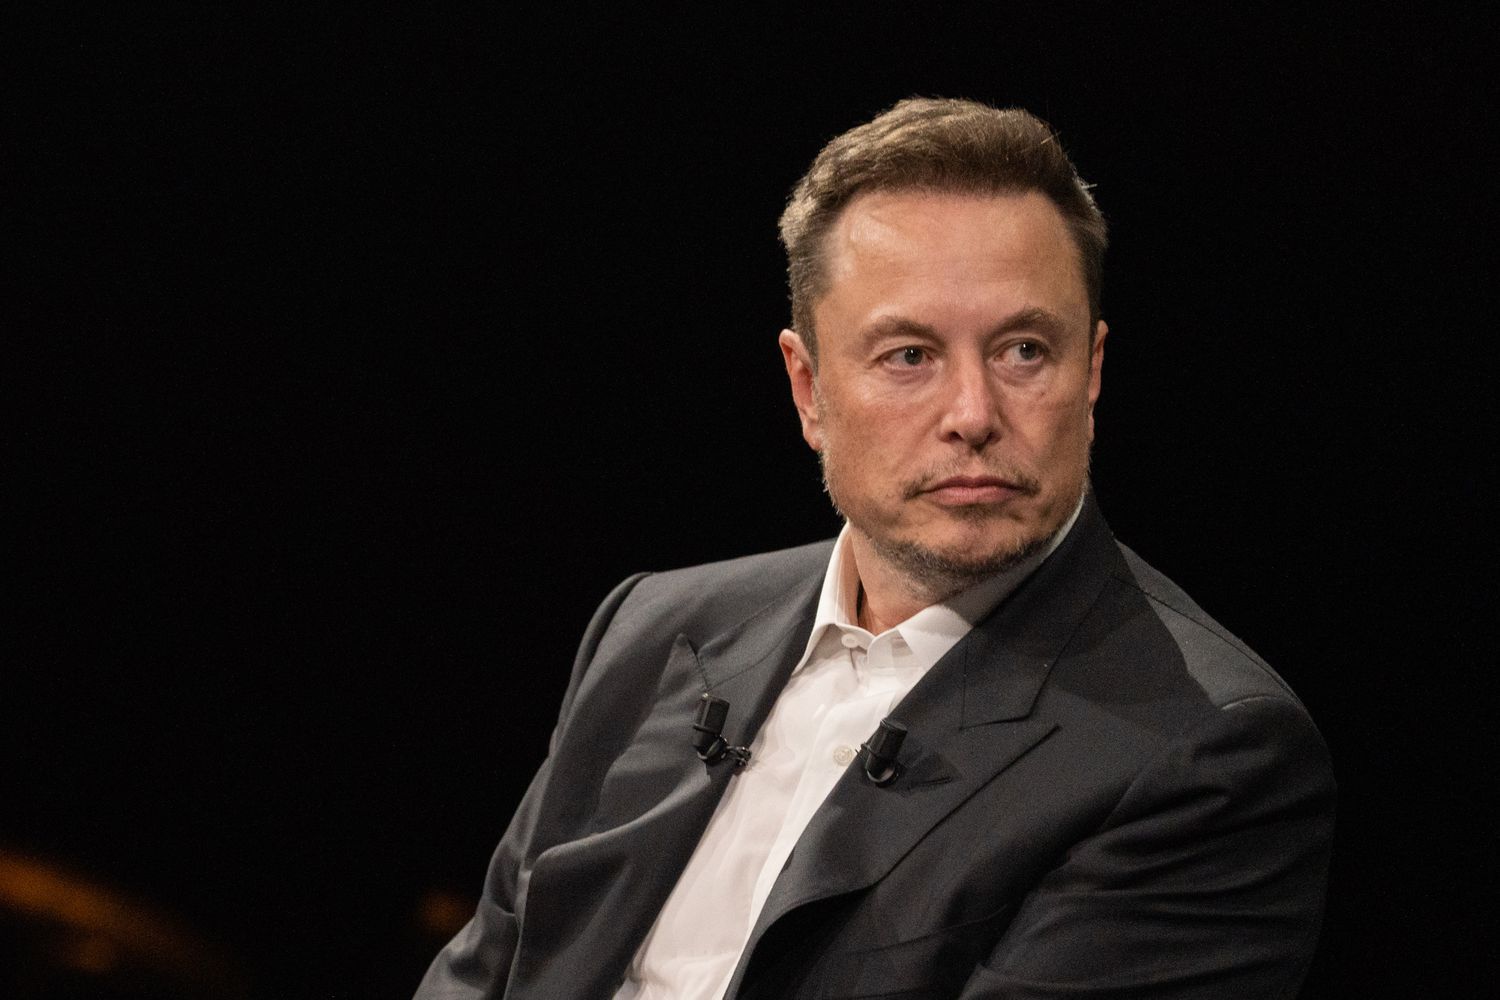 I am not donating money to either candidate for US President: Musk